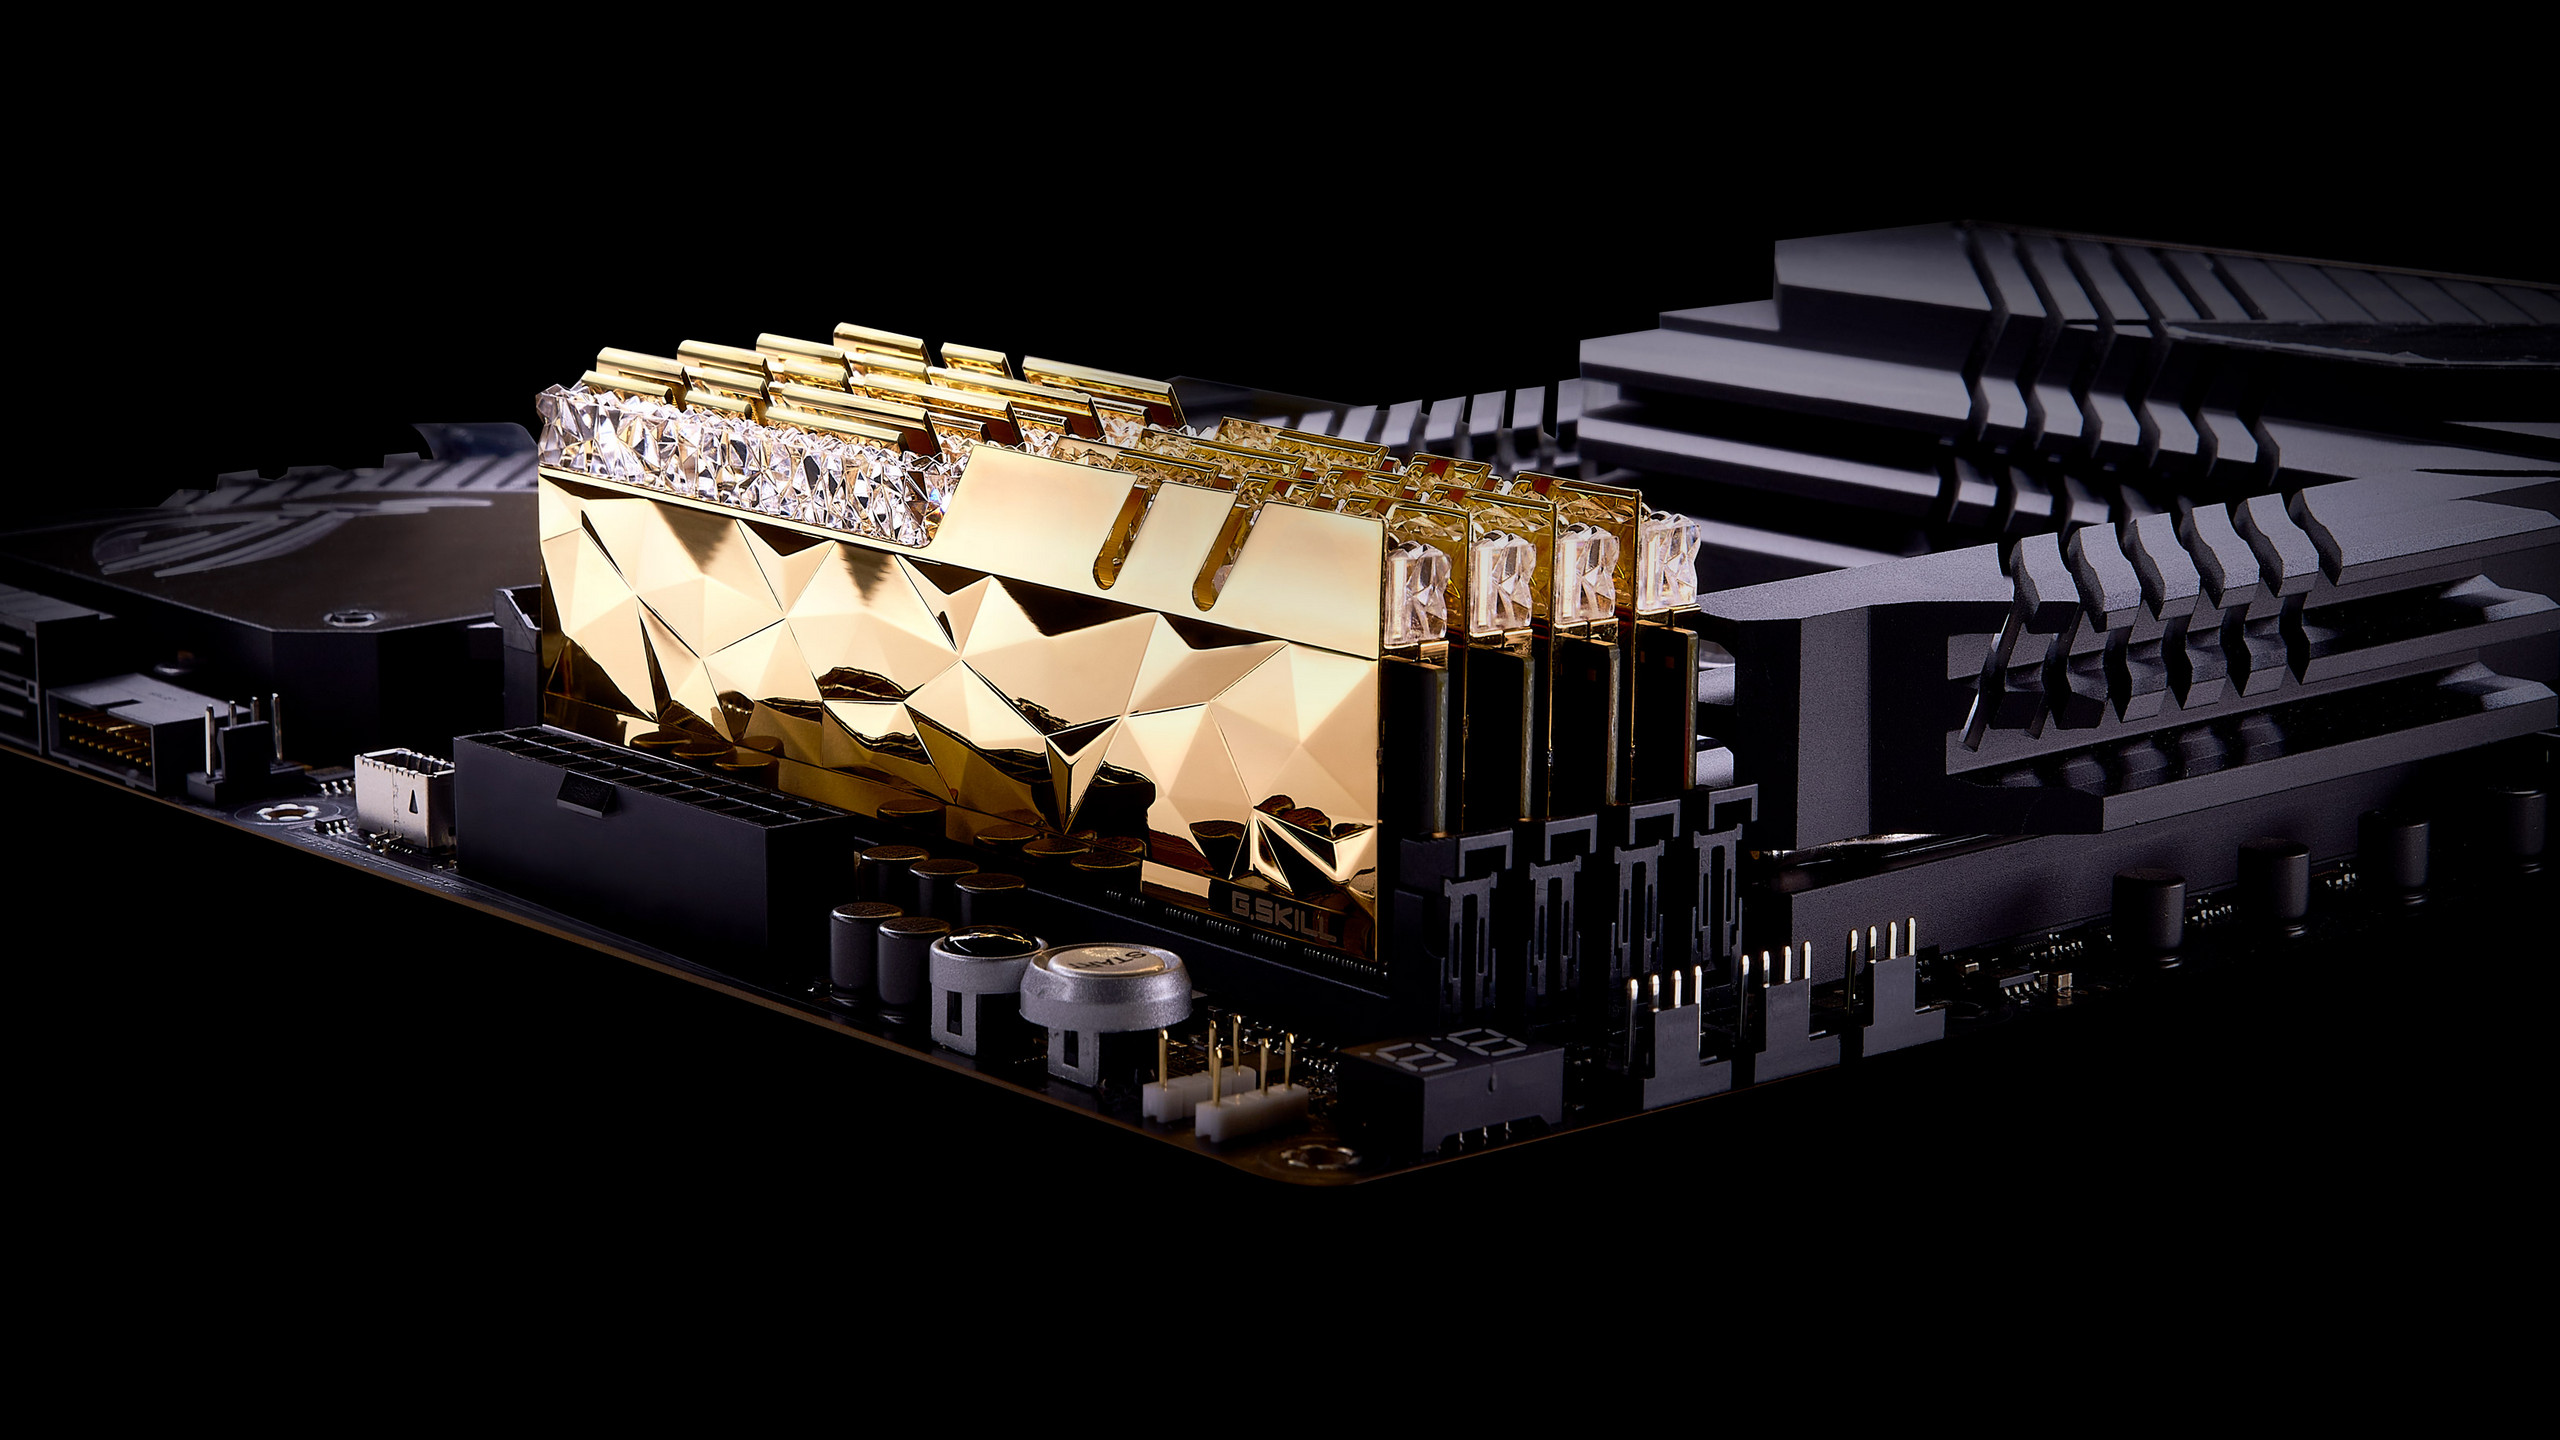 Media asset in full size related to 3dfxzone.it news item entitled as follows: G.SKILL annuncia moduli DDR4 Trident Z Royal Elite con frequenza fino a 5333MHz | Image Name: news31950_G-SKILL-Trident-Z-Royal-Elite_2.jpg